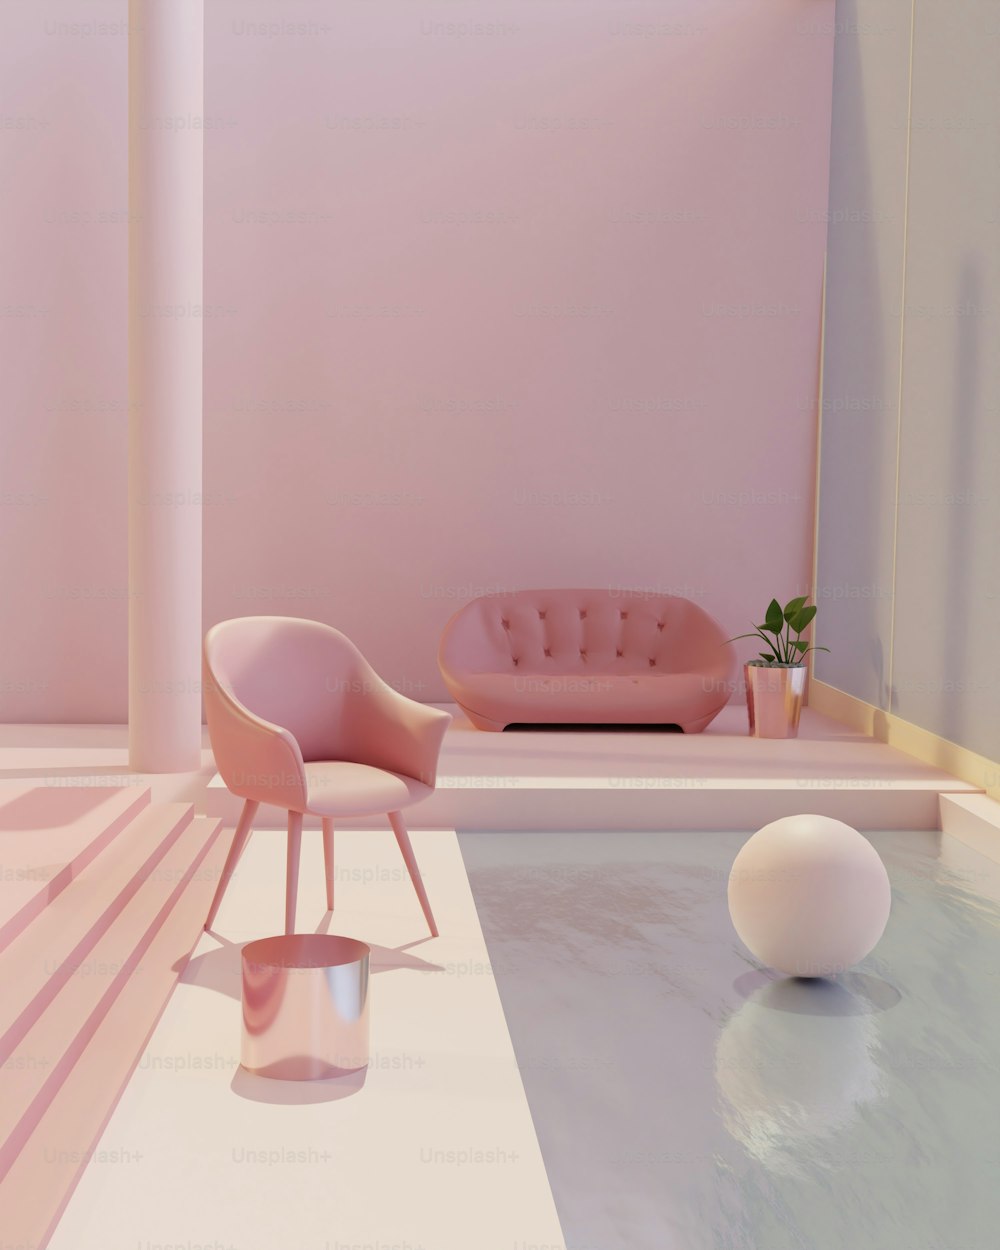 a room with a couch, chair and a ball on the floor